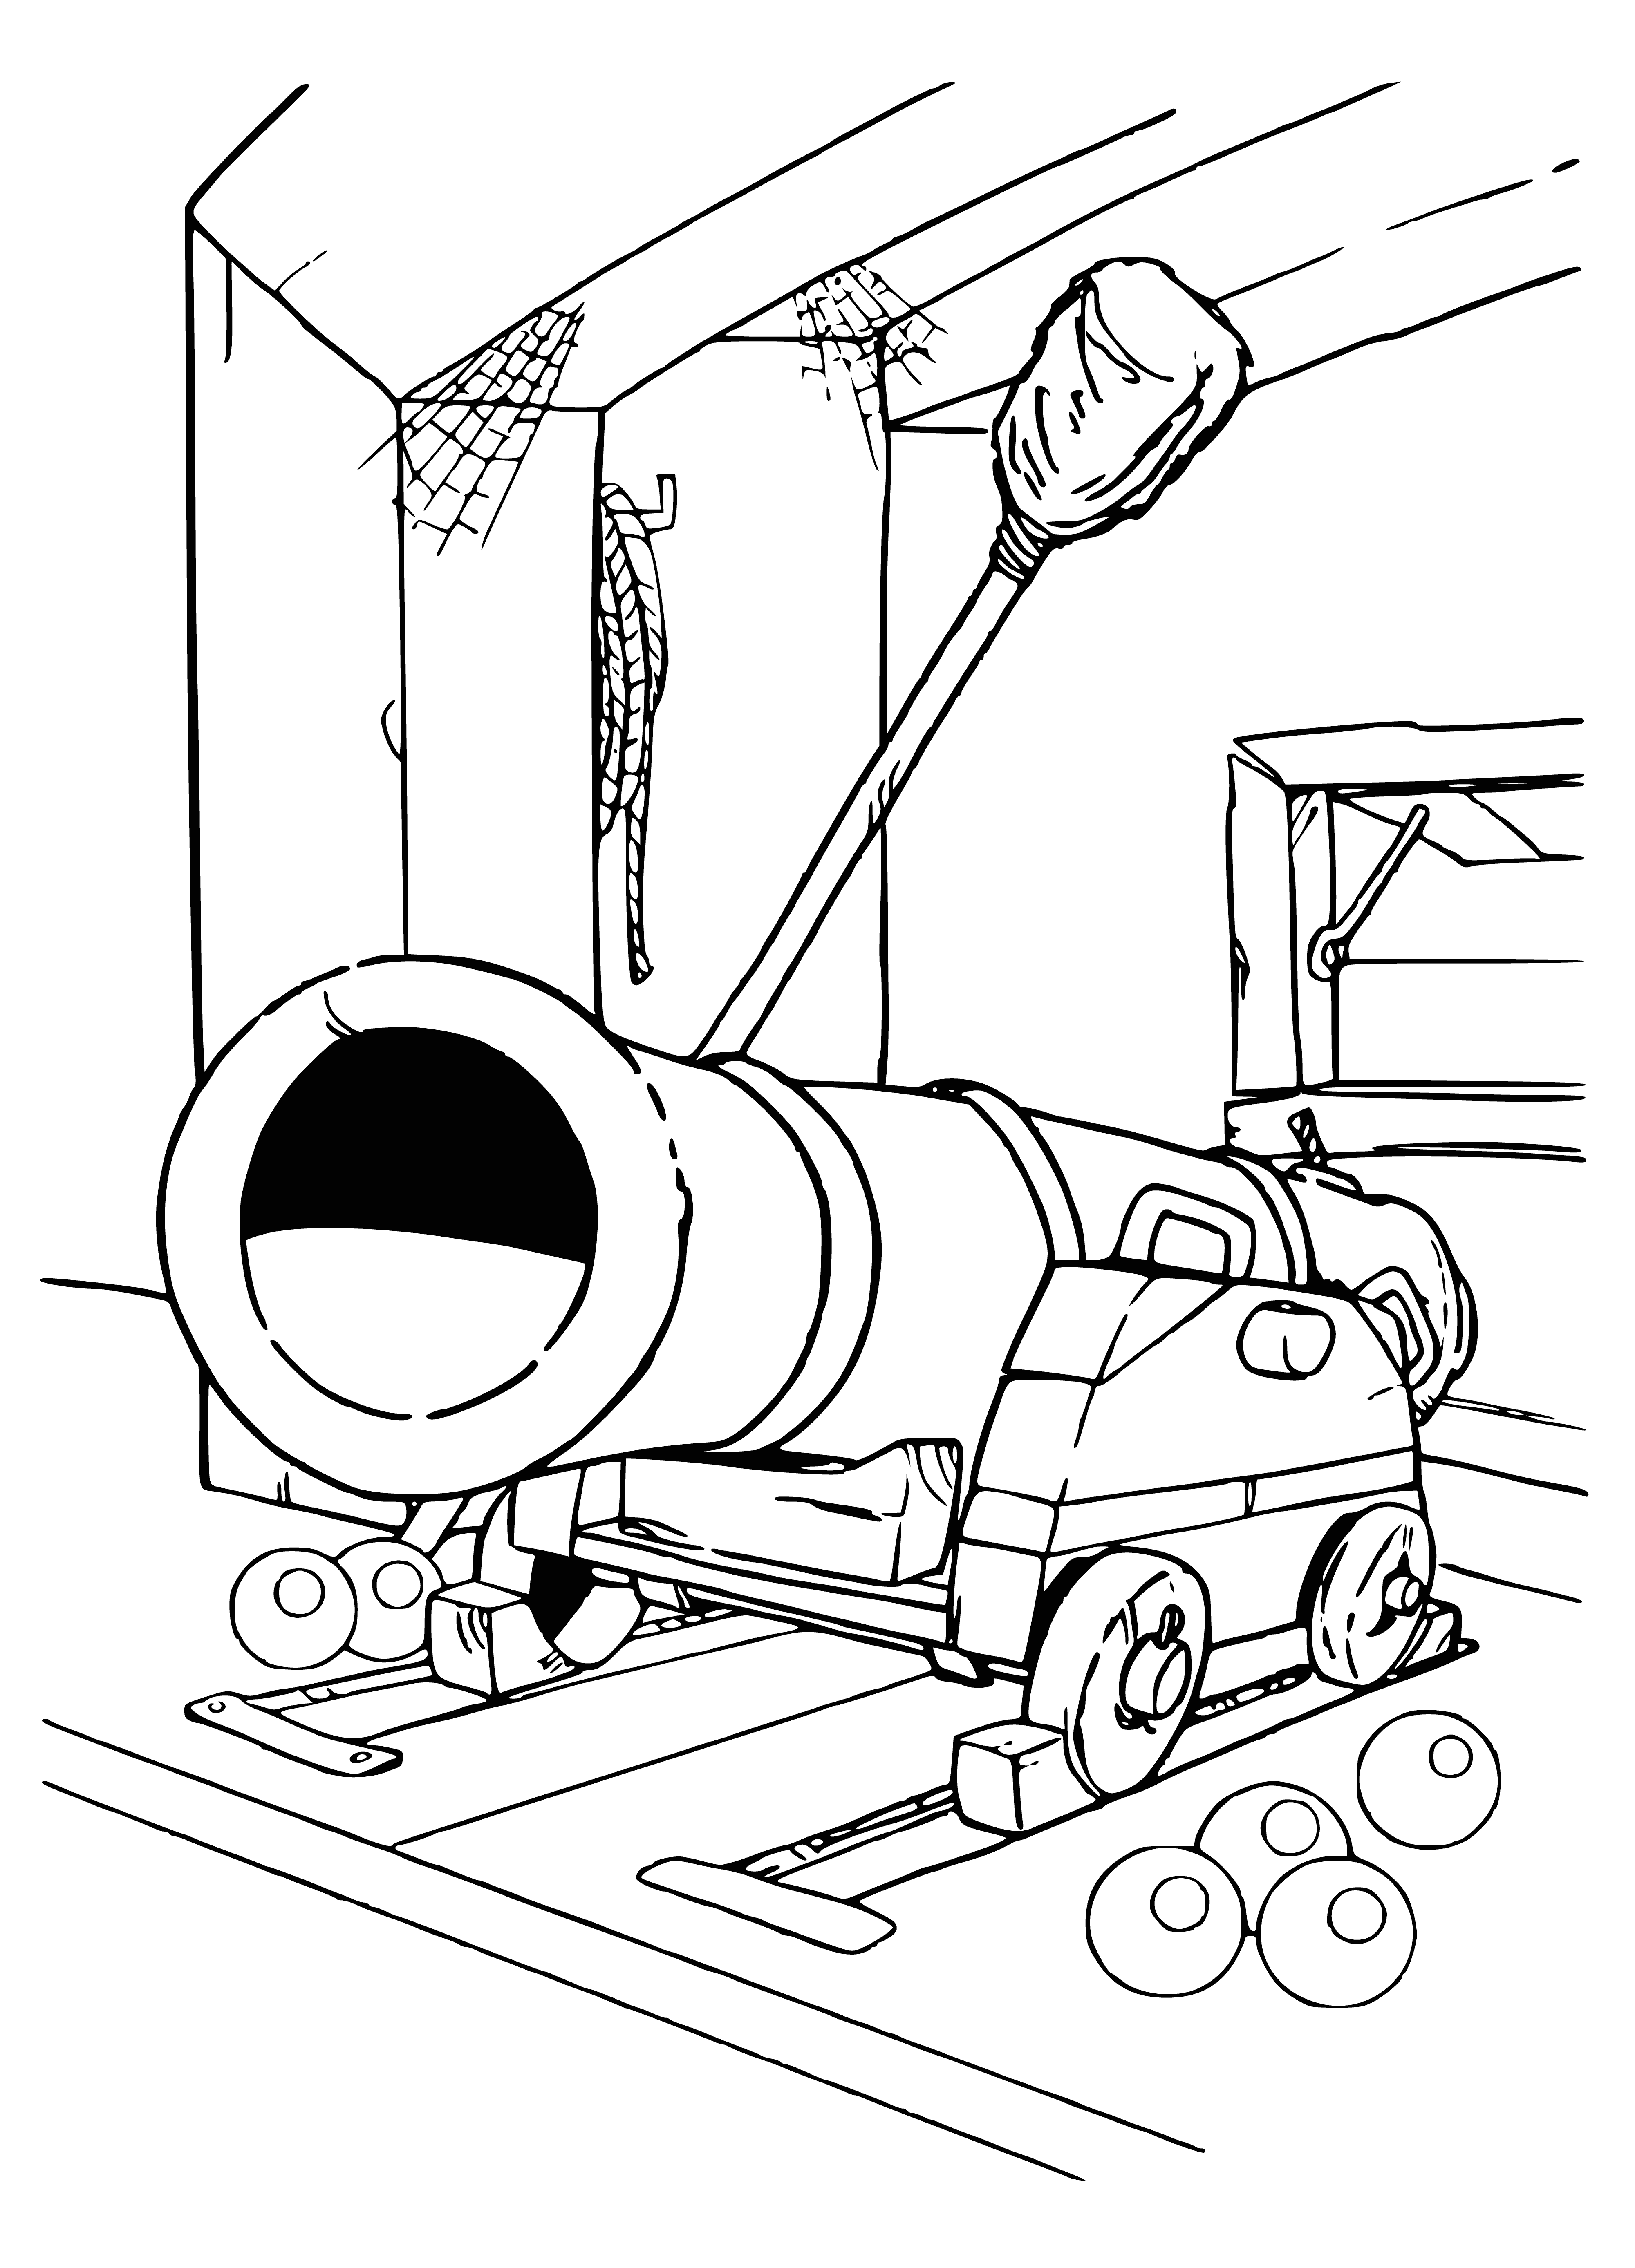 Ship cannon coloring page